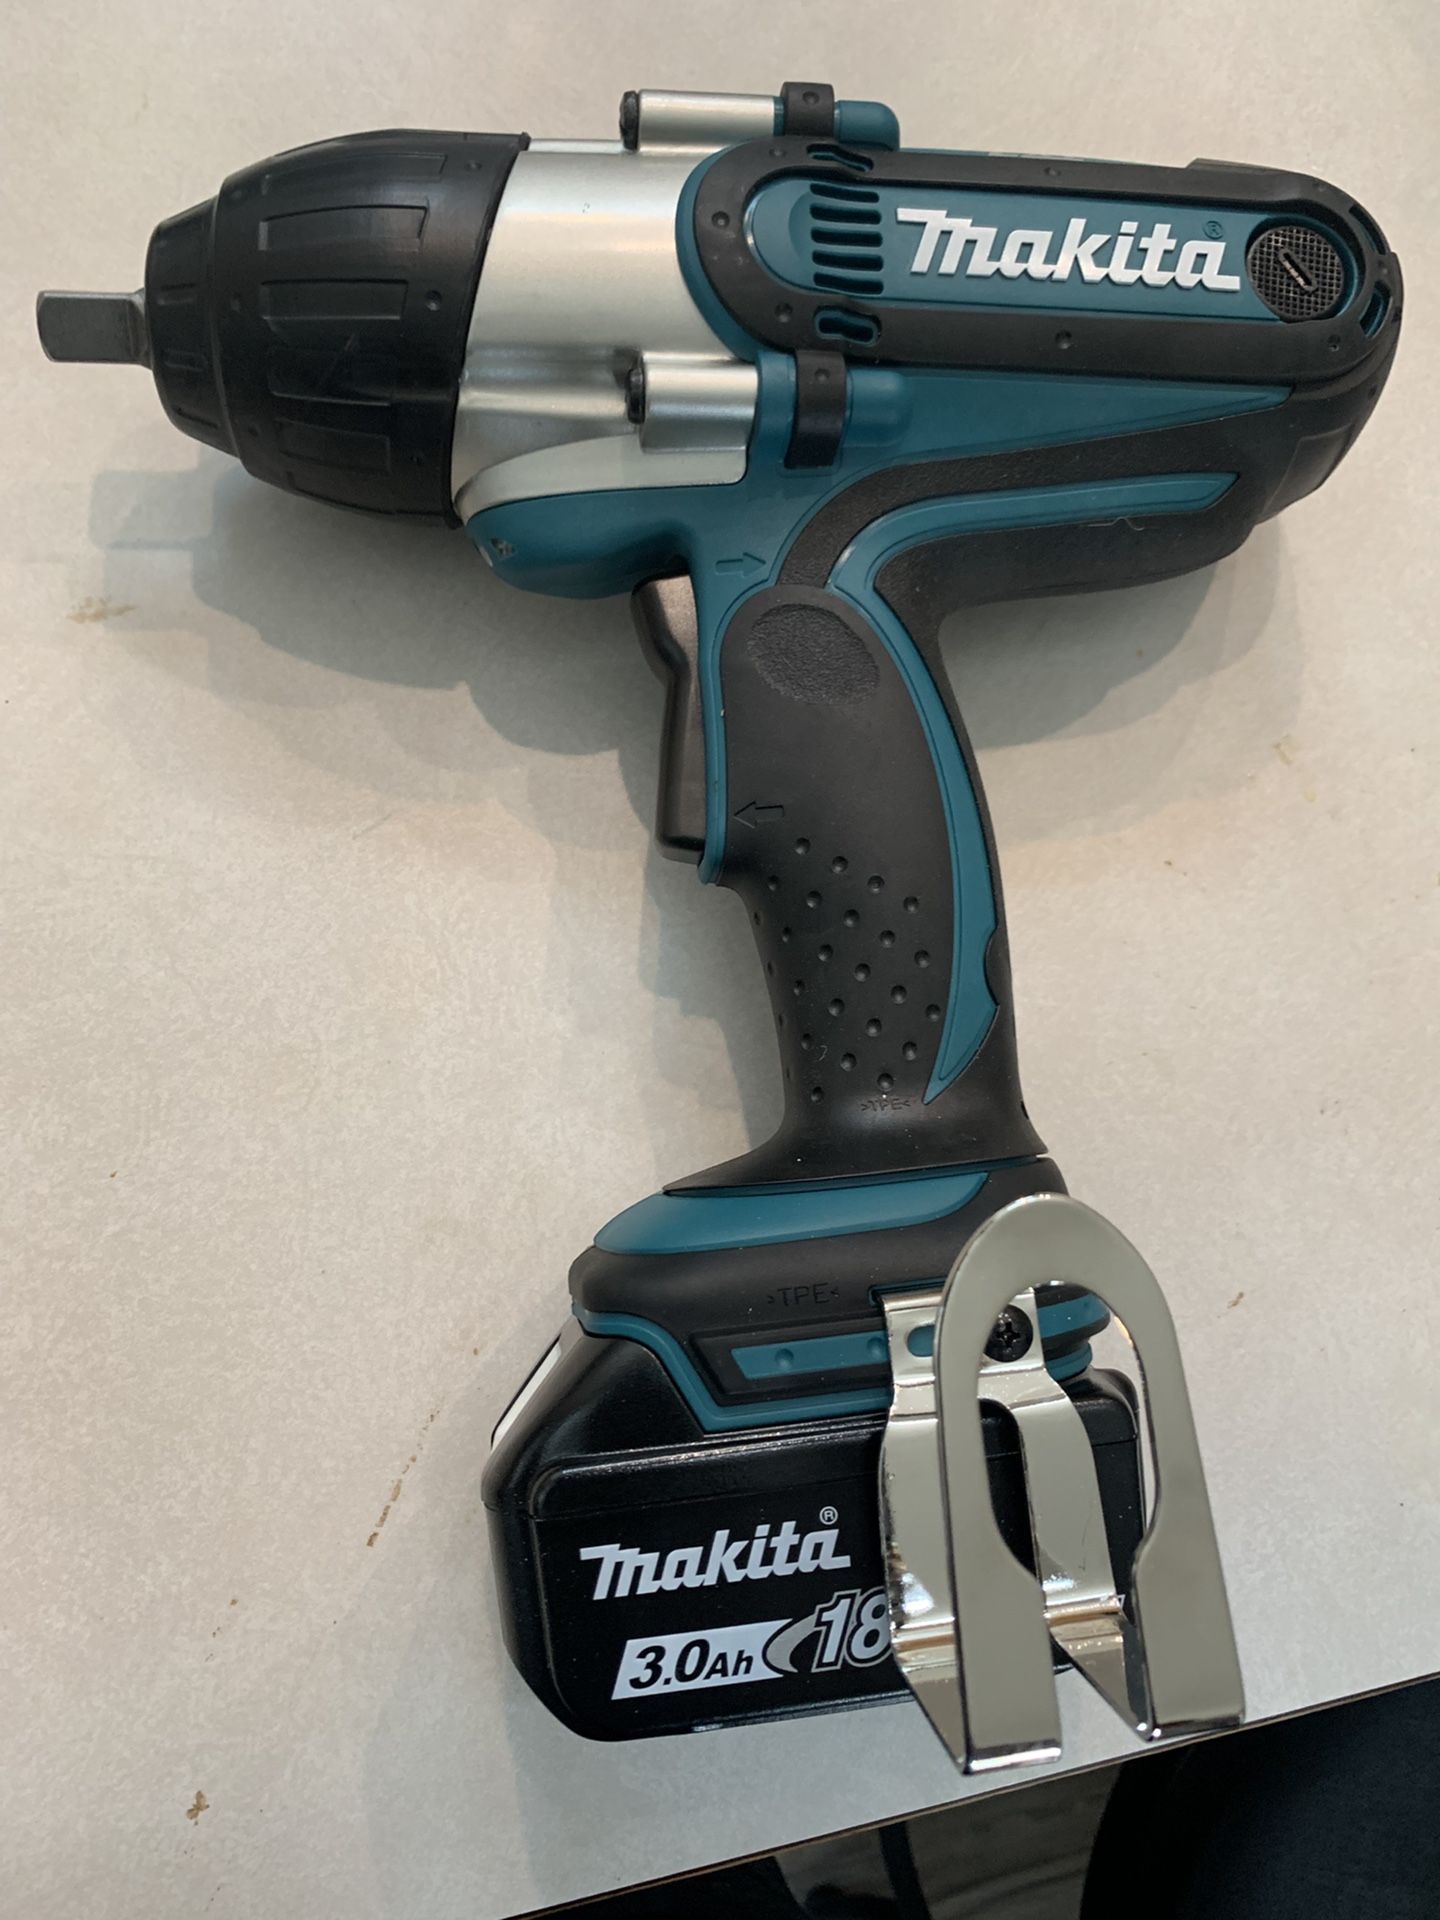 New MAKITA 18-Volt LXT Lithium-Ion Cordless 1/2 in. Sq. Drive Impact Wrench Kit, (3.0Ah) $180 Firm Price  